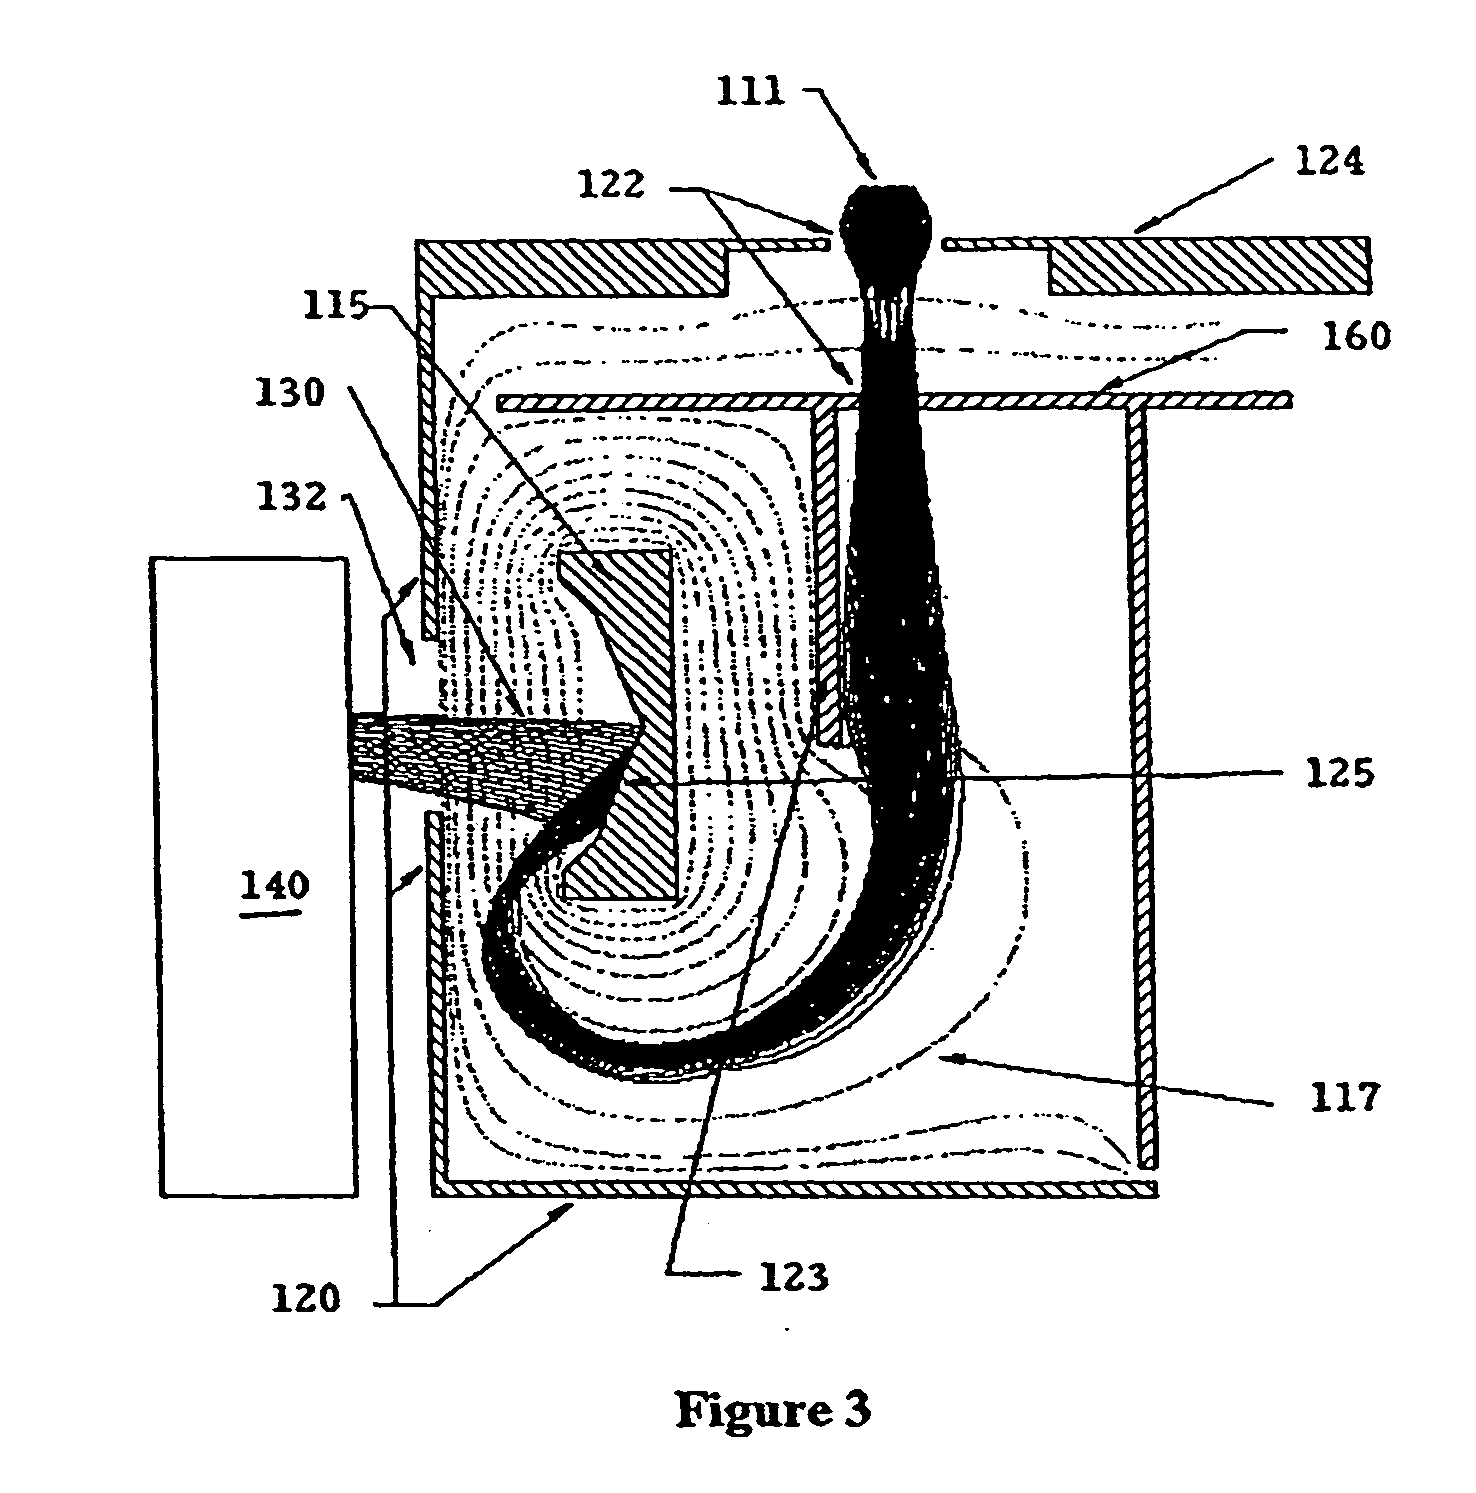 Apparatus for amplifying a stream of charged particles